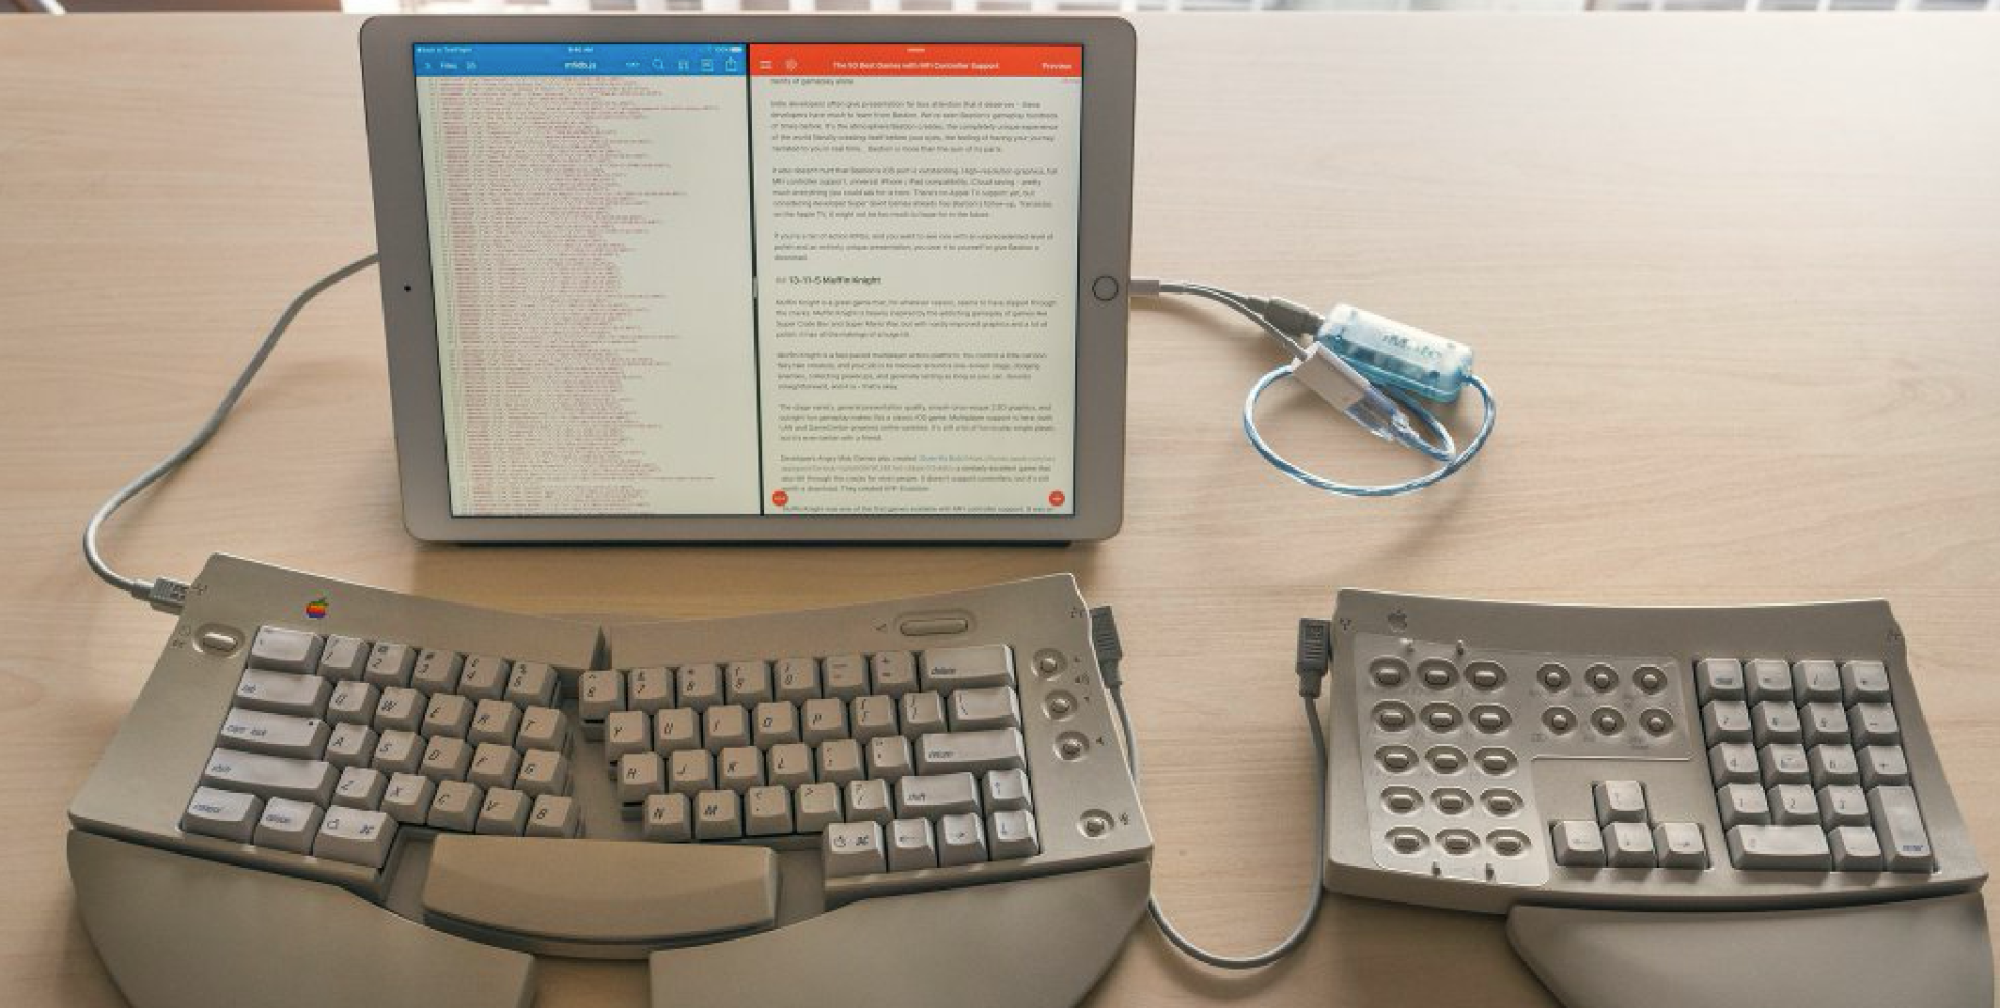 Apple iPad can be paired to a 1993 Apple Adjustable Keyboard for Mac